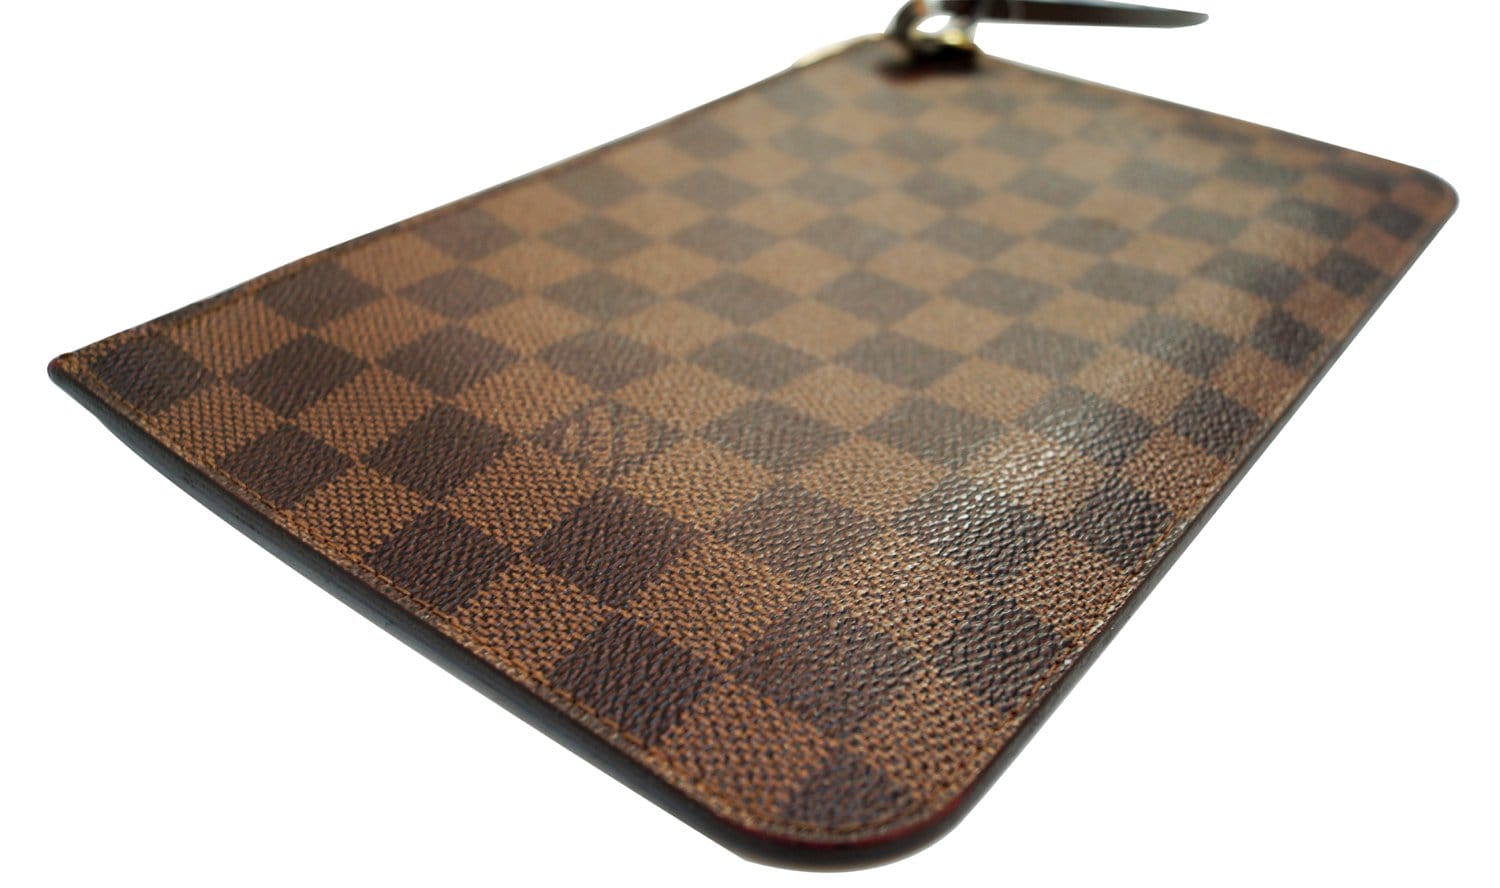 Louis Vuitton Discovery Pochette Damier Infini Leather GM - ShopStyle  Clutches